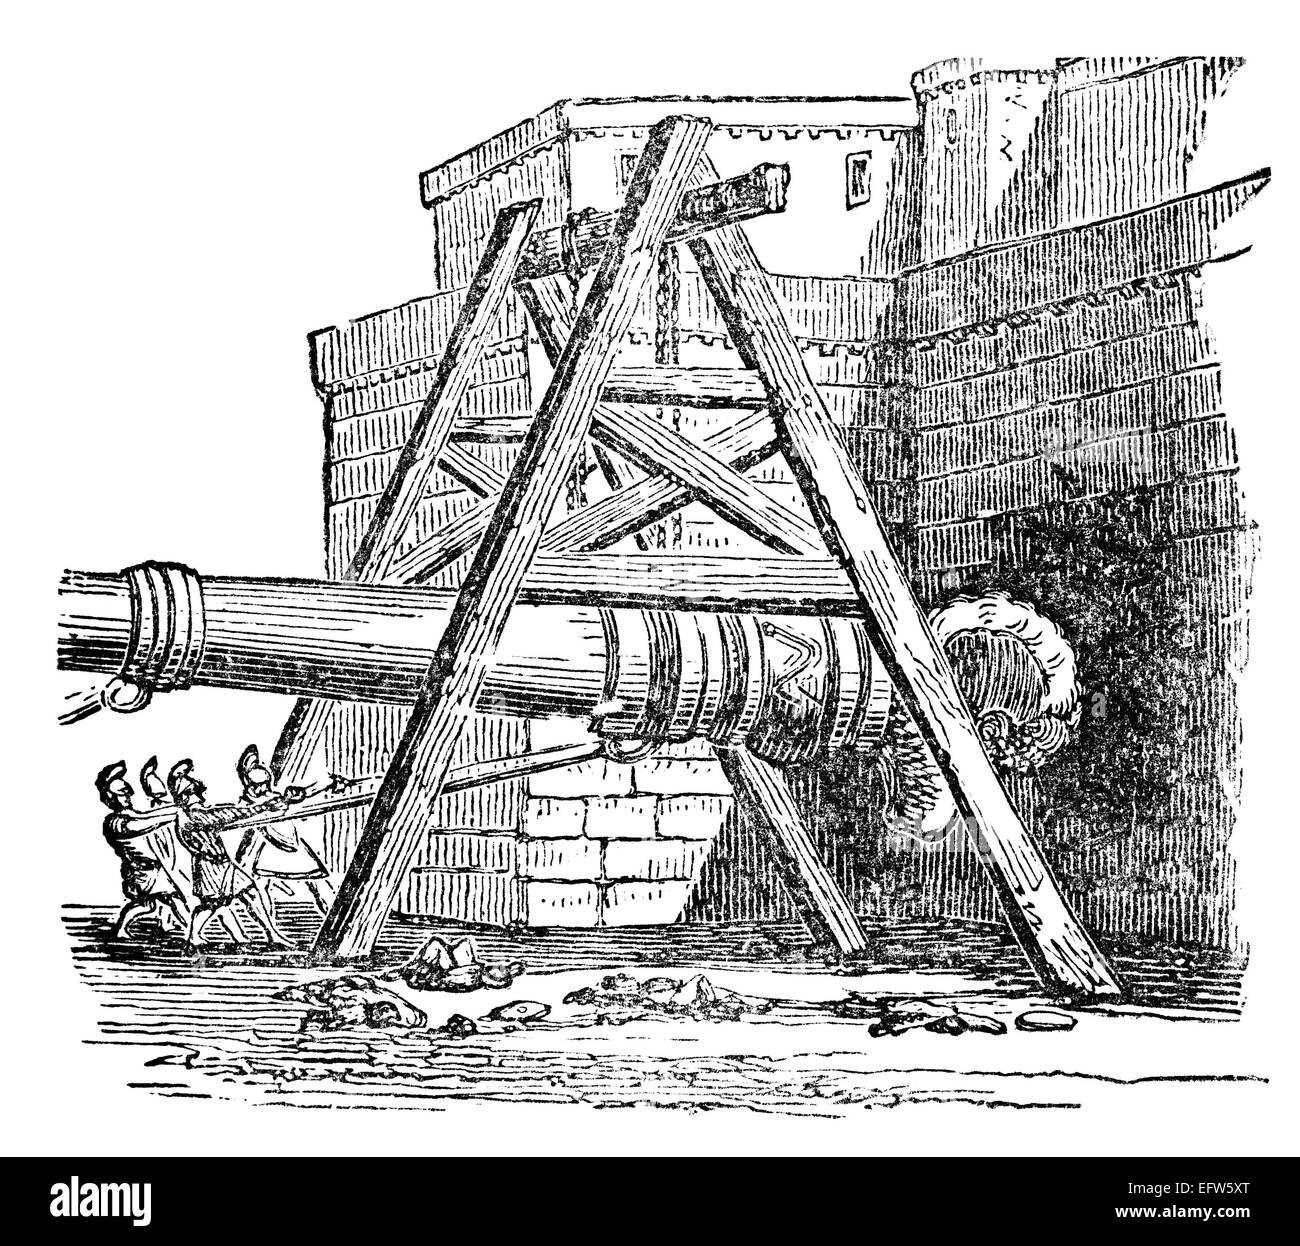 Victorian engraving of a siege engine attacking a castle. Digitally restored image from a mid-19th century Encyclopaedia. Stock Photo